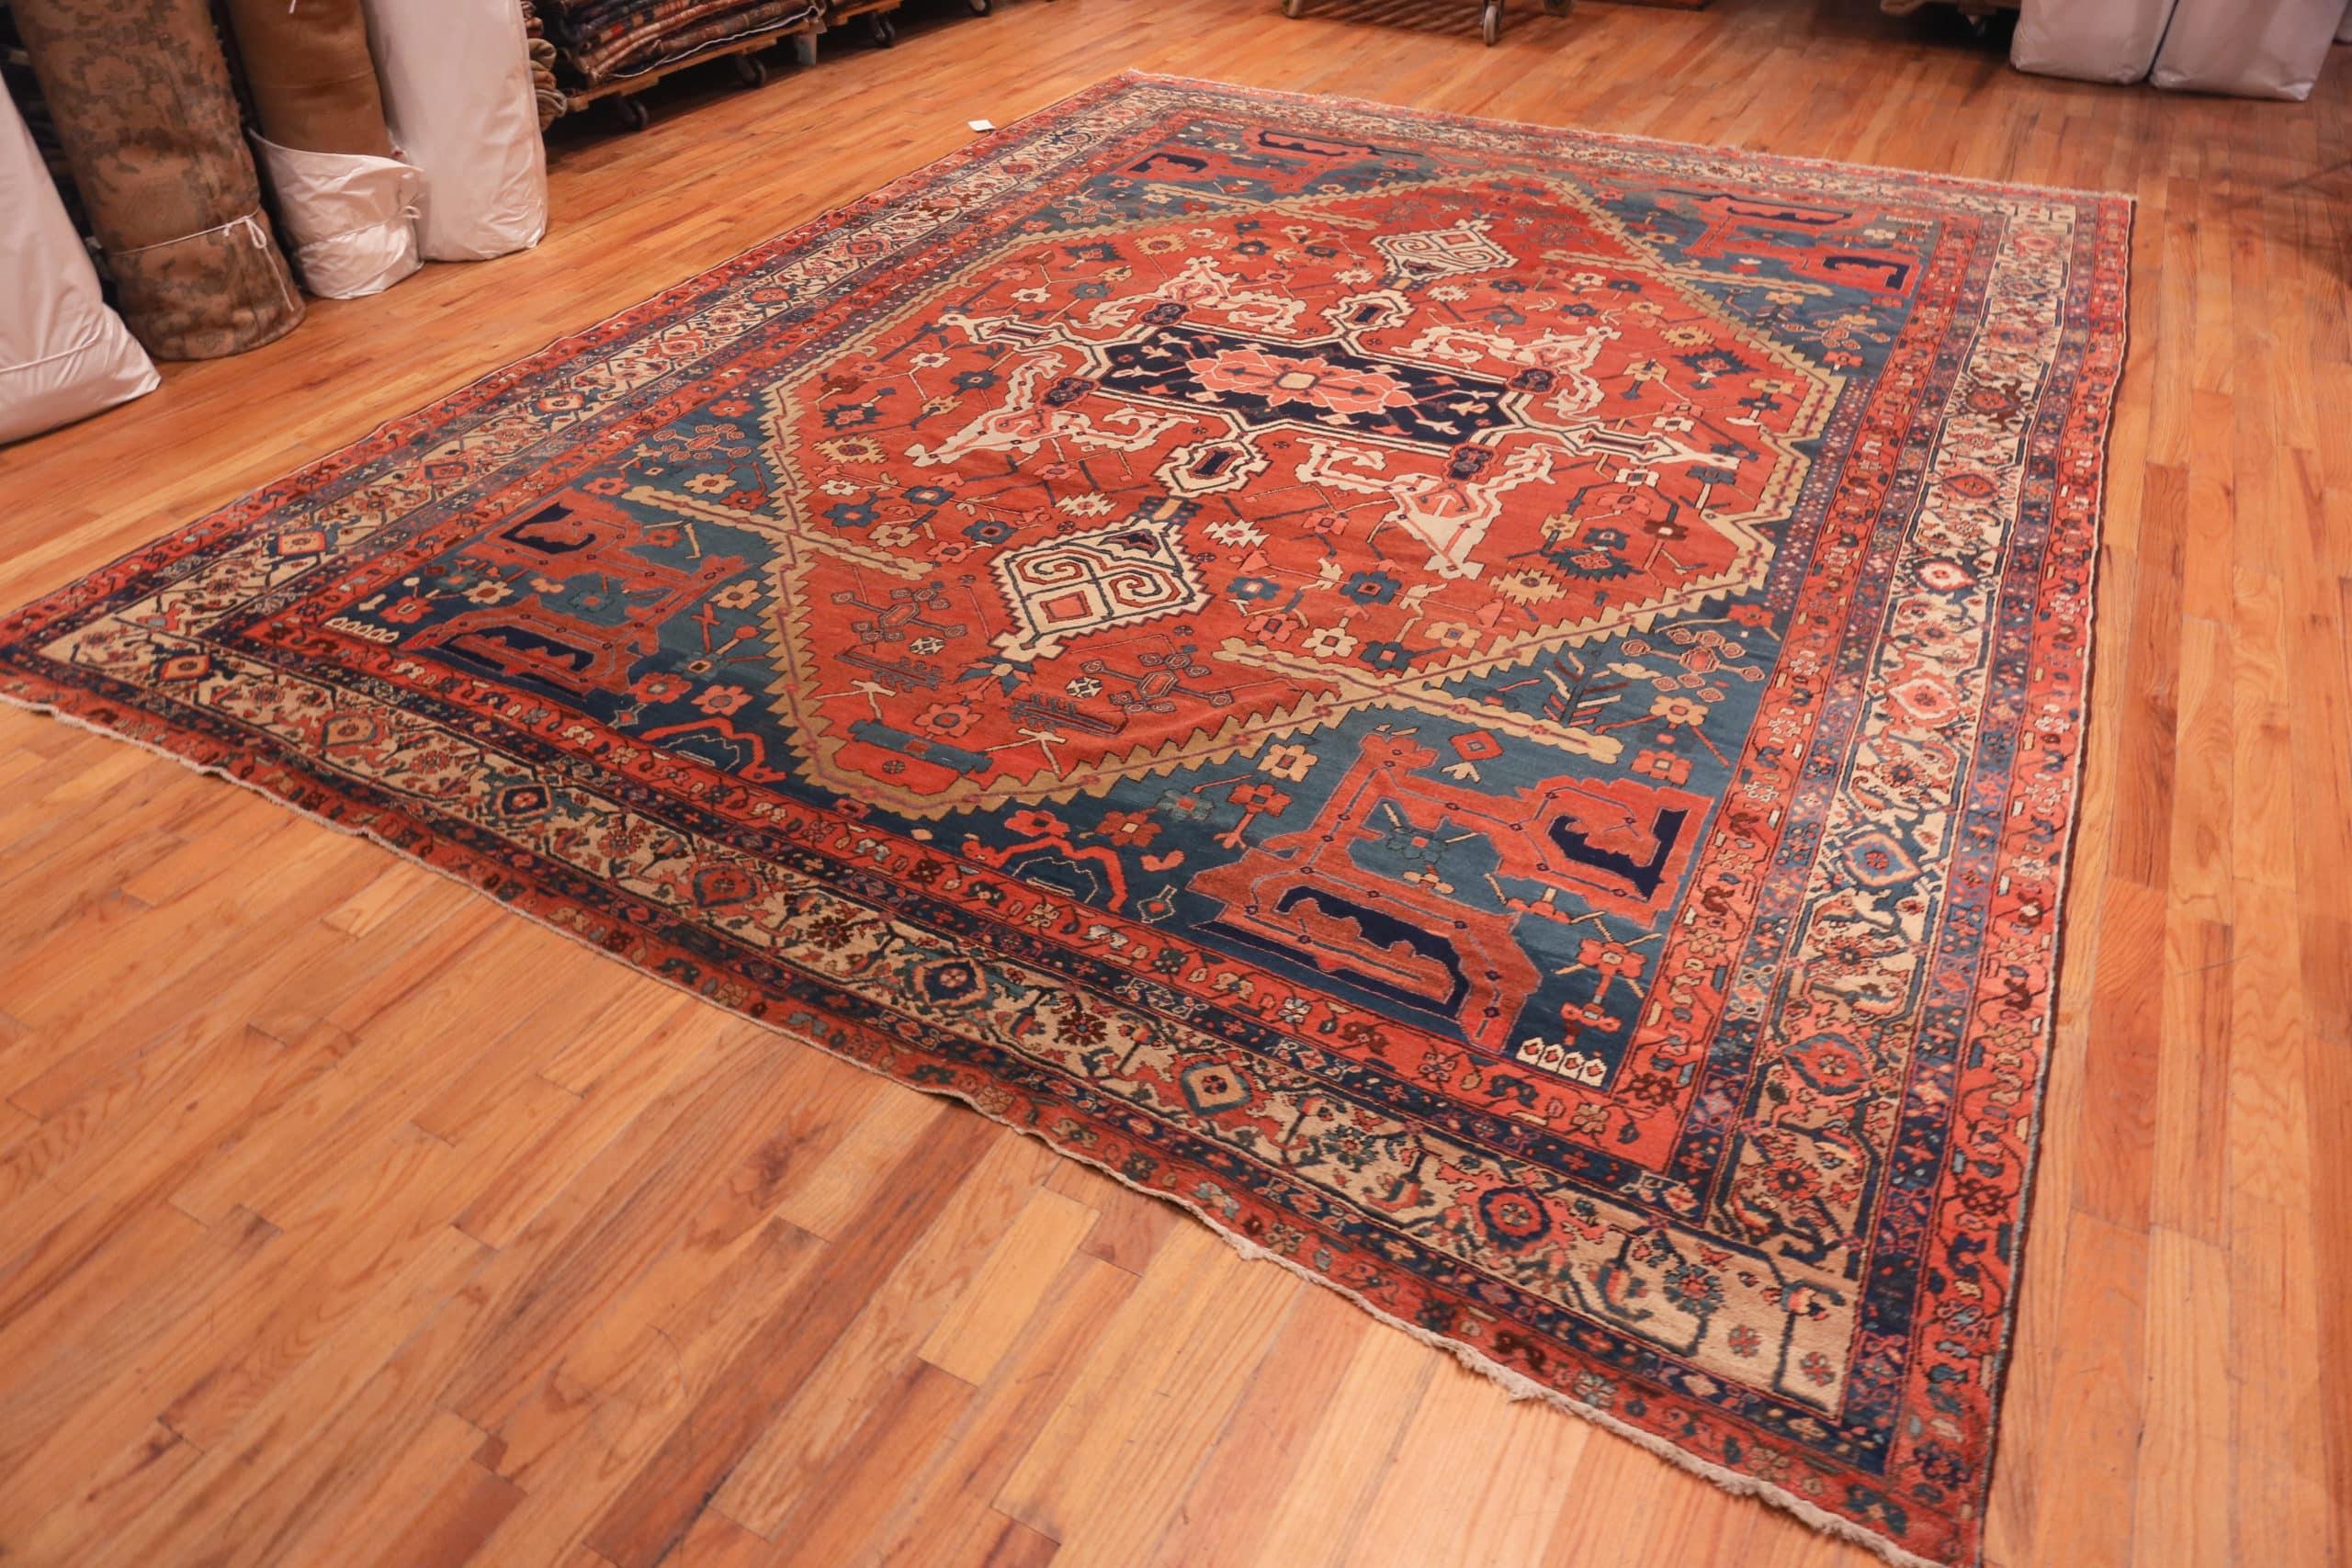 Wool Nazmiyal Collection Antique Persian Serapi Area Rug. 11 ft 4 in x 14 ft 6 in